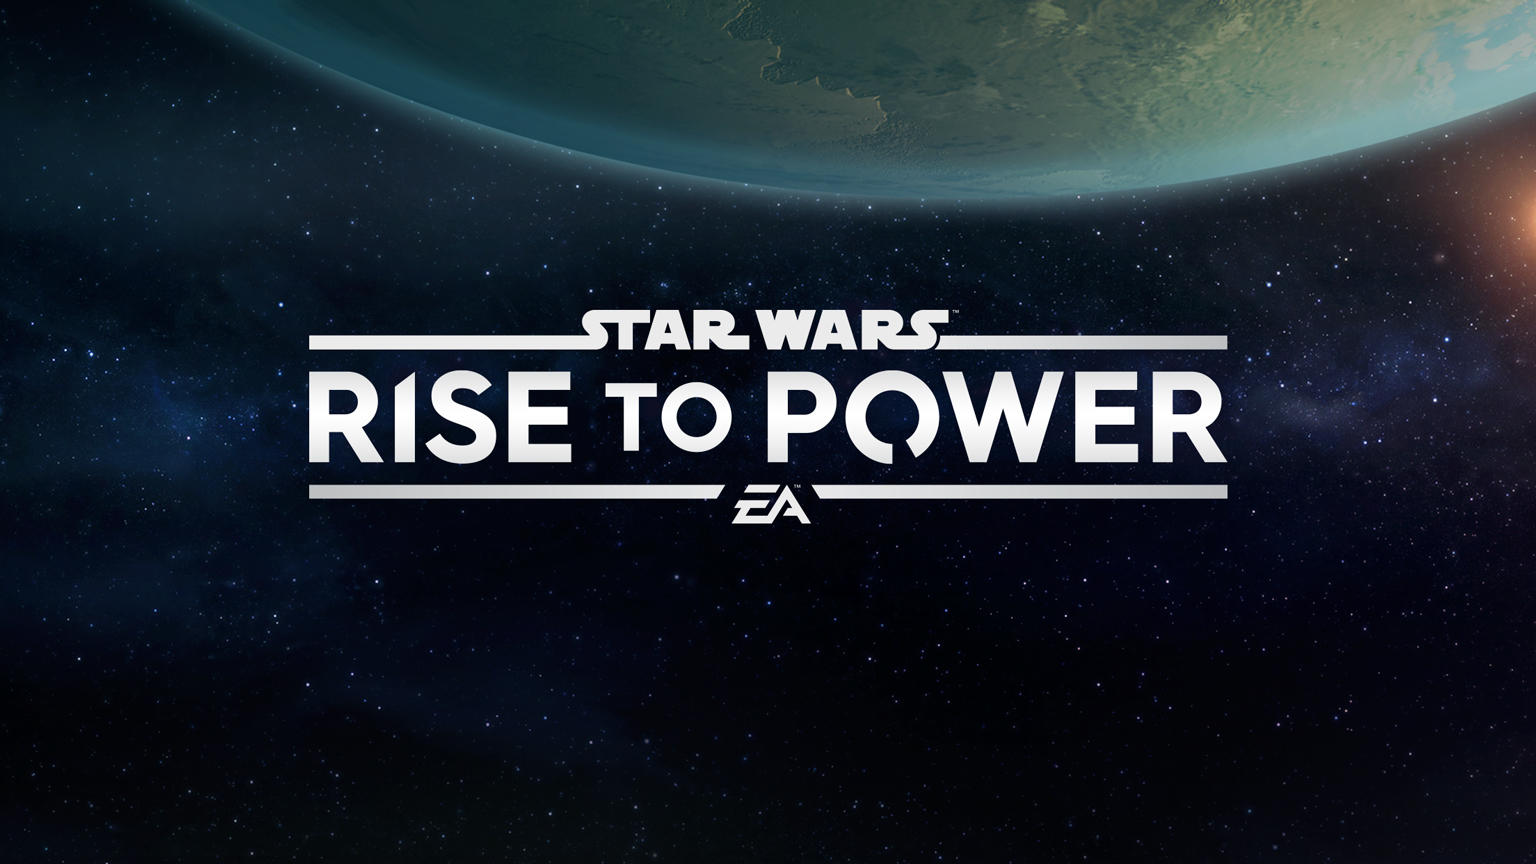 Star Wars: Rise to Power游戏截图